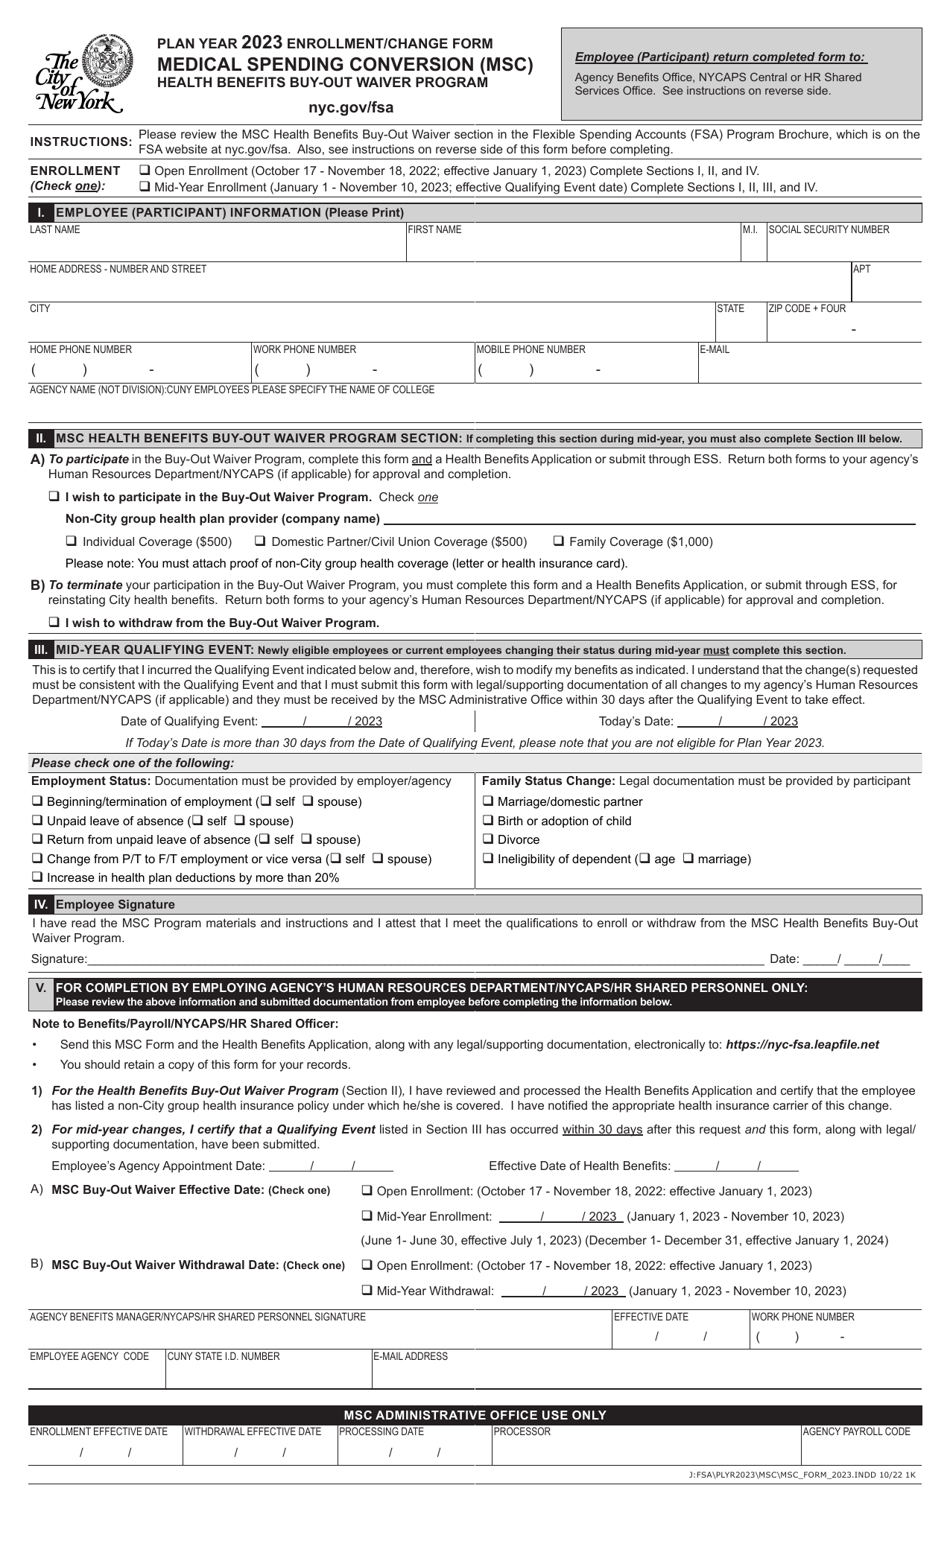 Plan Year Enrollment / Change Form - Medical Spending Conversion (Msc) Health Benefits Buy-Out Waiver Program - New York City, Page 1